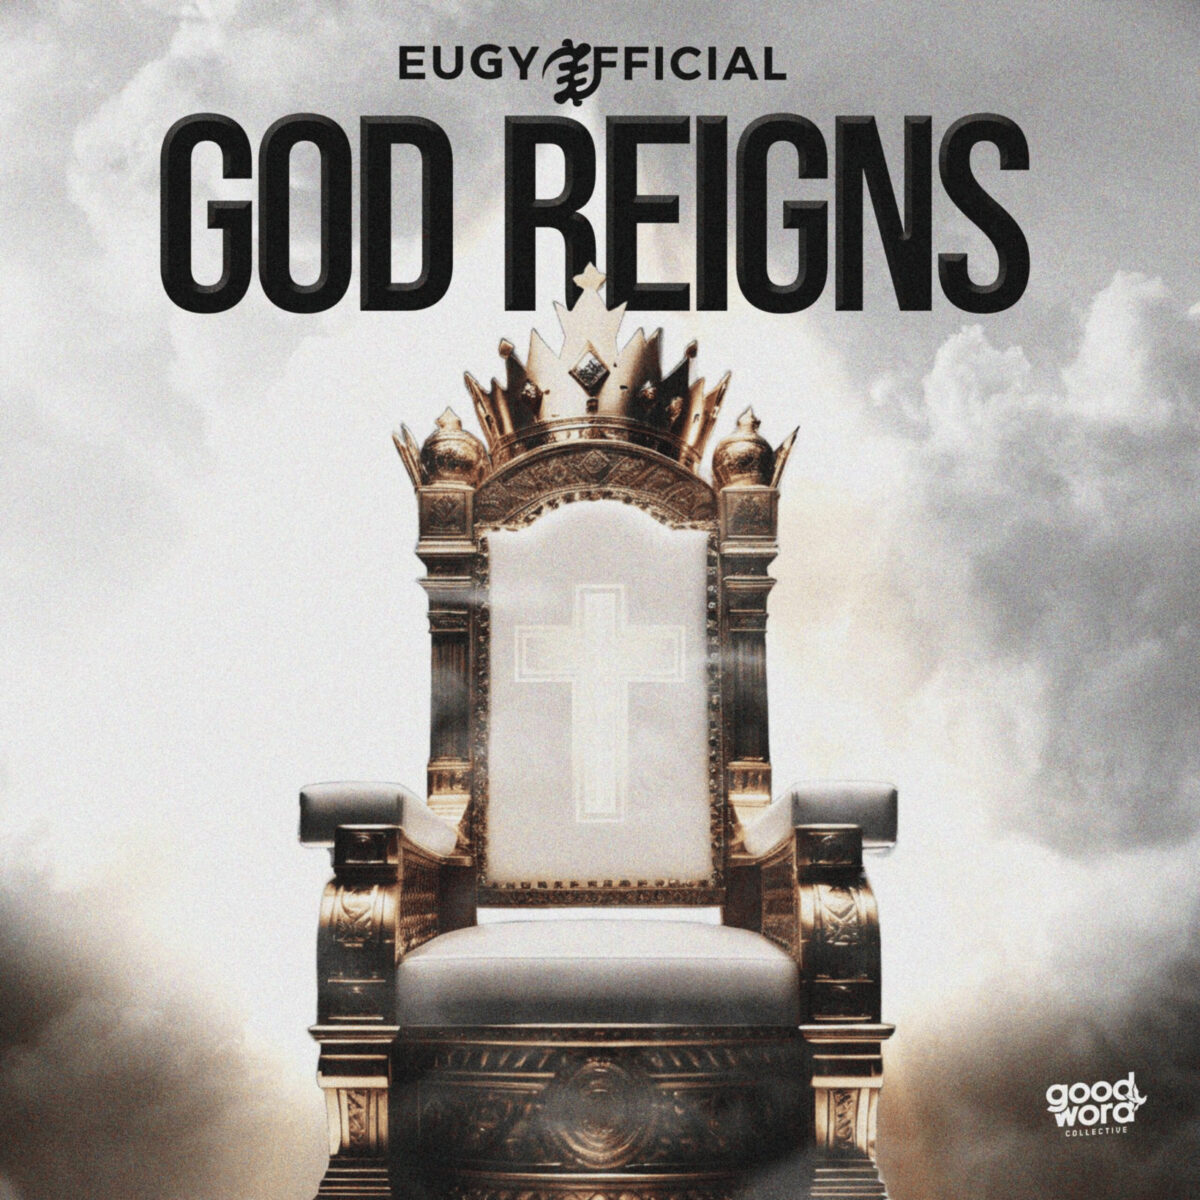 God Reigns by Eugy Official